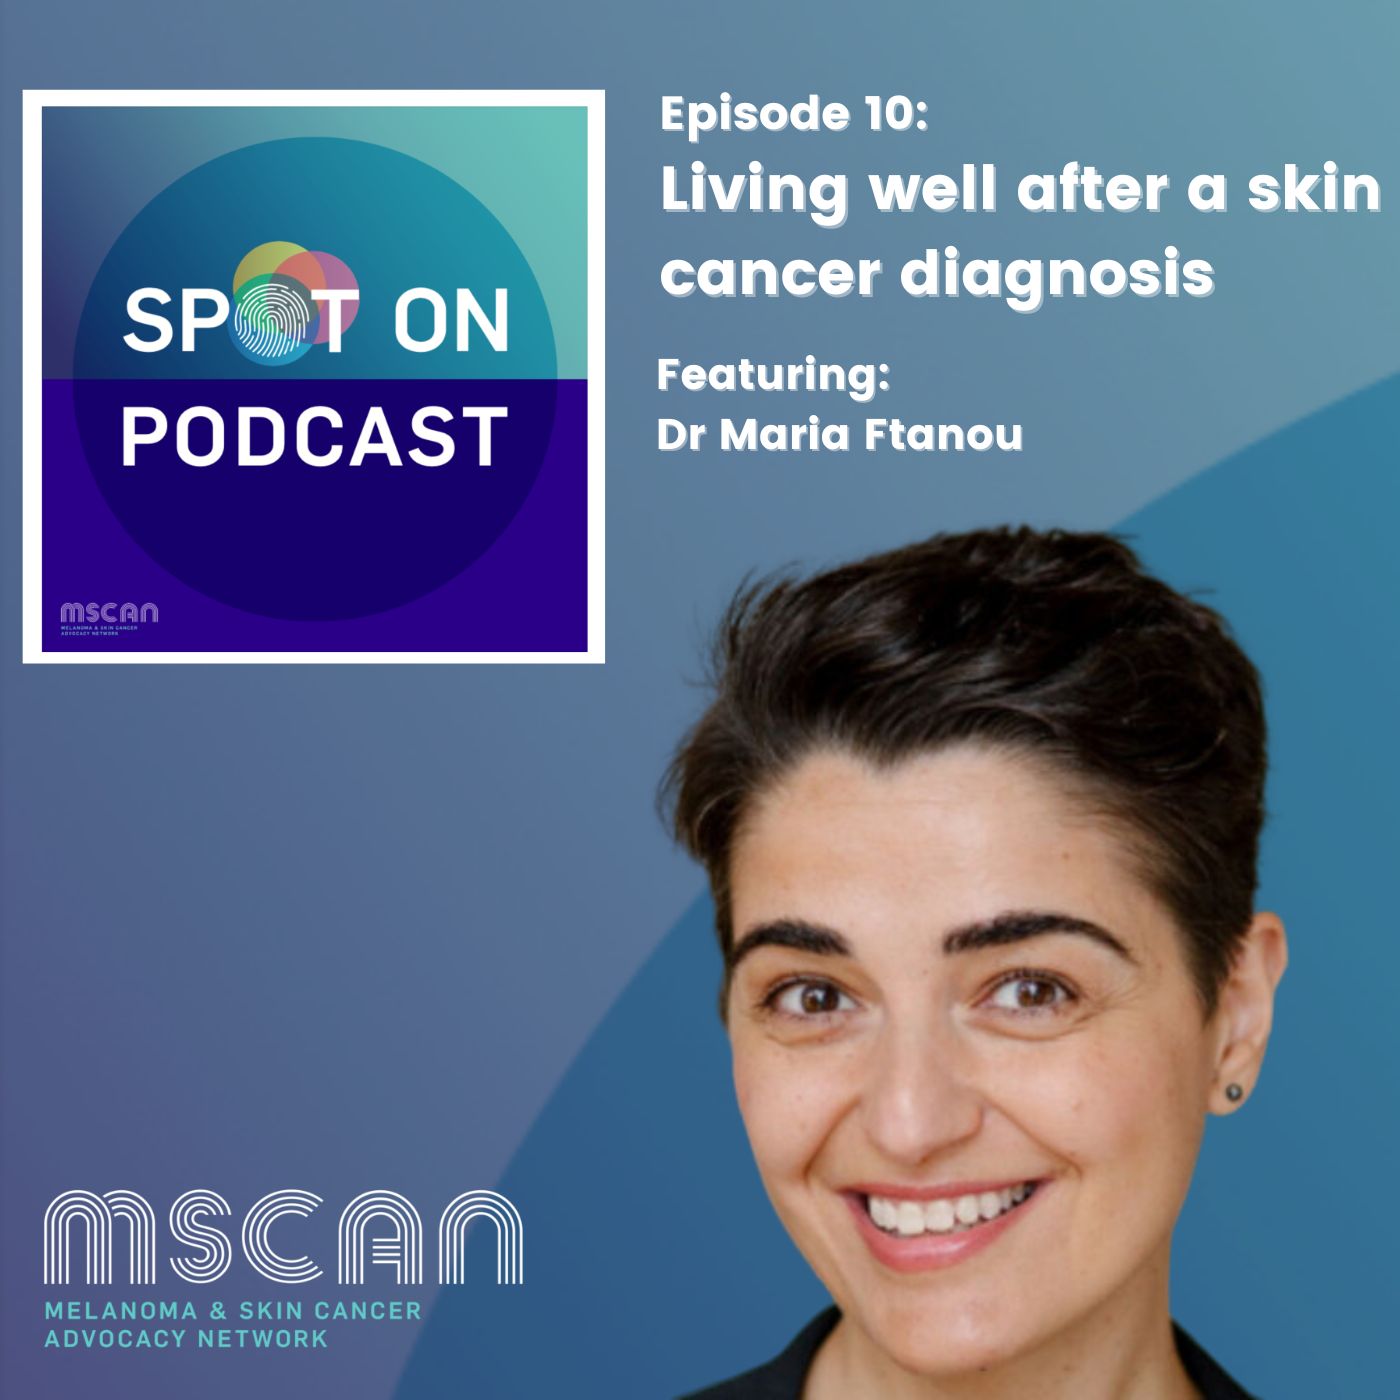 Living well after a skin cancer diagnosis - Dr Maria Ftanou